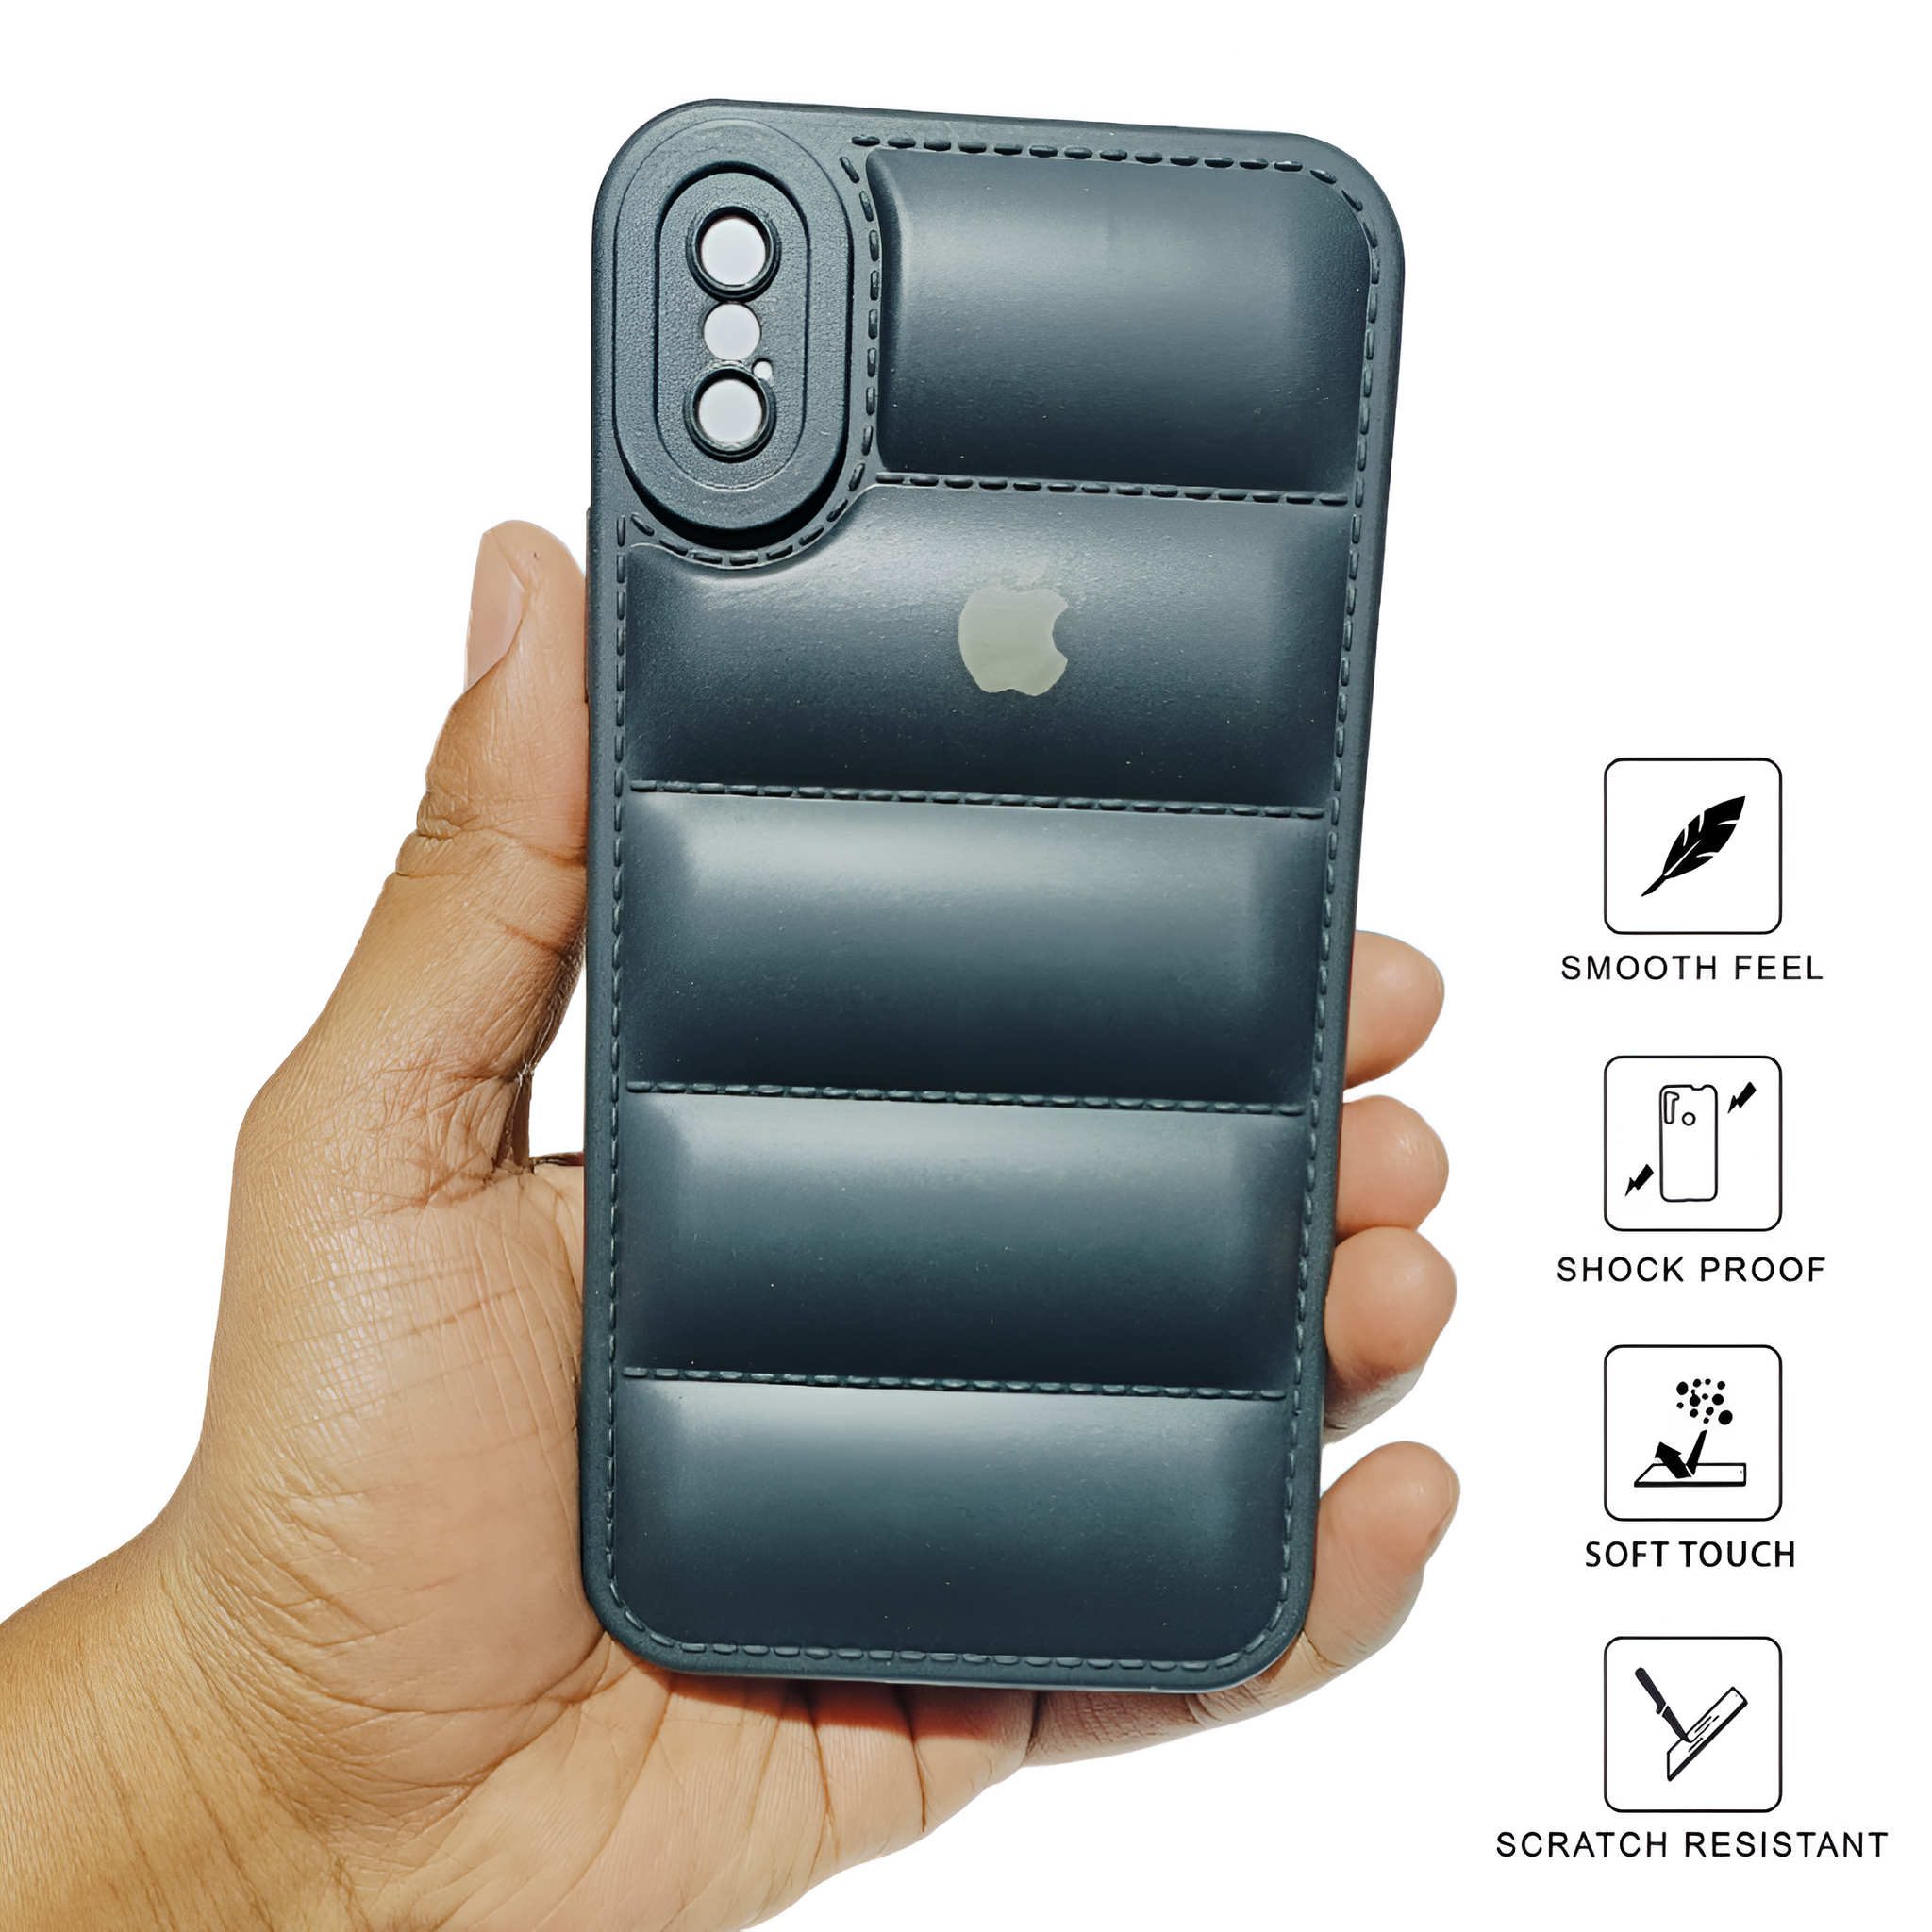 Black Puffon silicone case for Apple iPhone Xs Max